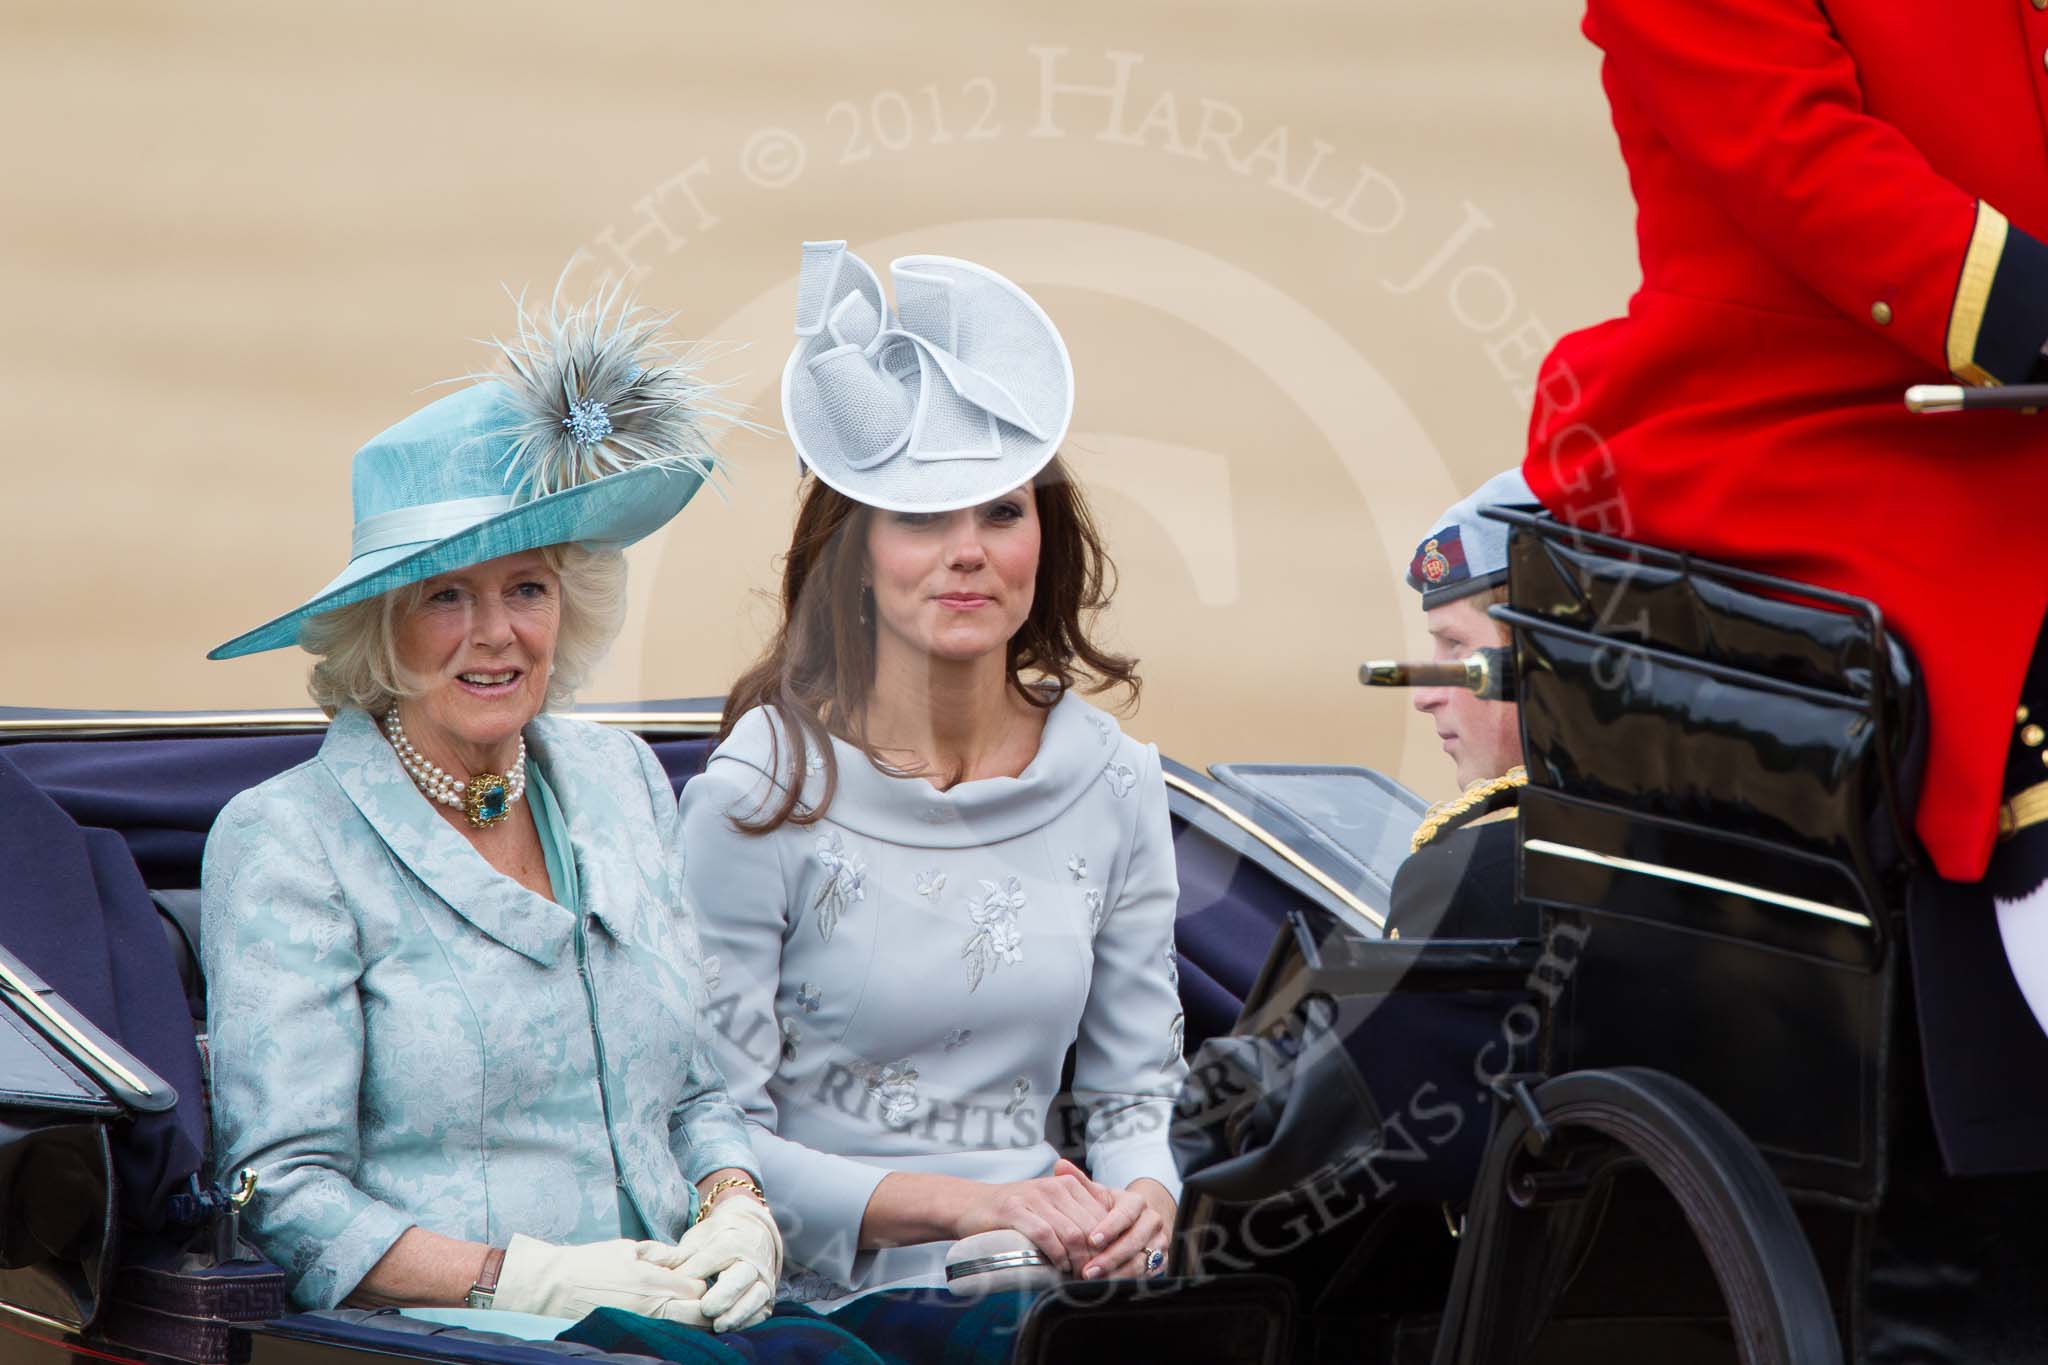 Trooping the Colour 2012: The Duchess of Cornwall, the Duchess of Cambridge, and Prince Harry in the first carriage..
Horse Guards Parade, Westminster,
London SW1,

United Kingdom,
on 16 June 2012 at 10:50, image #124